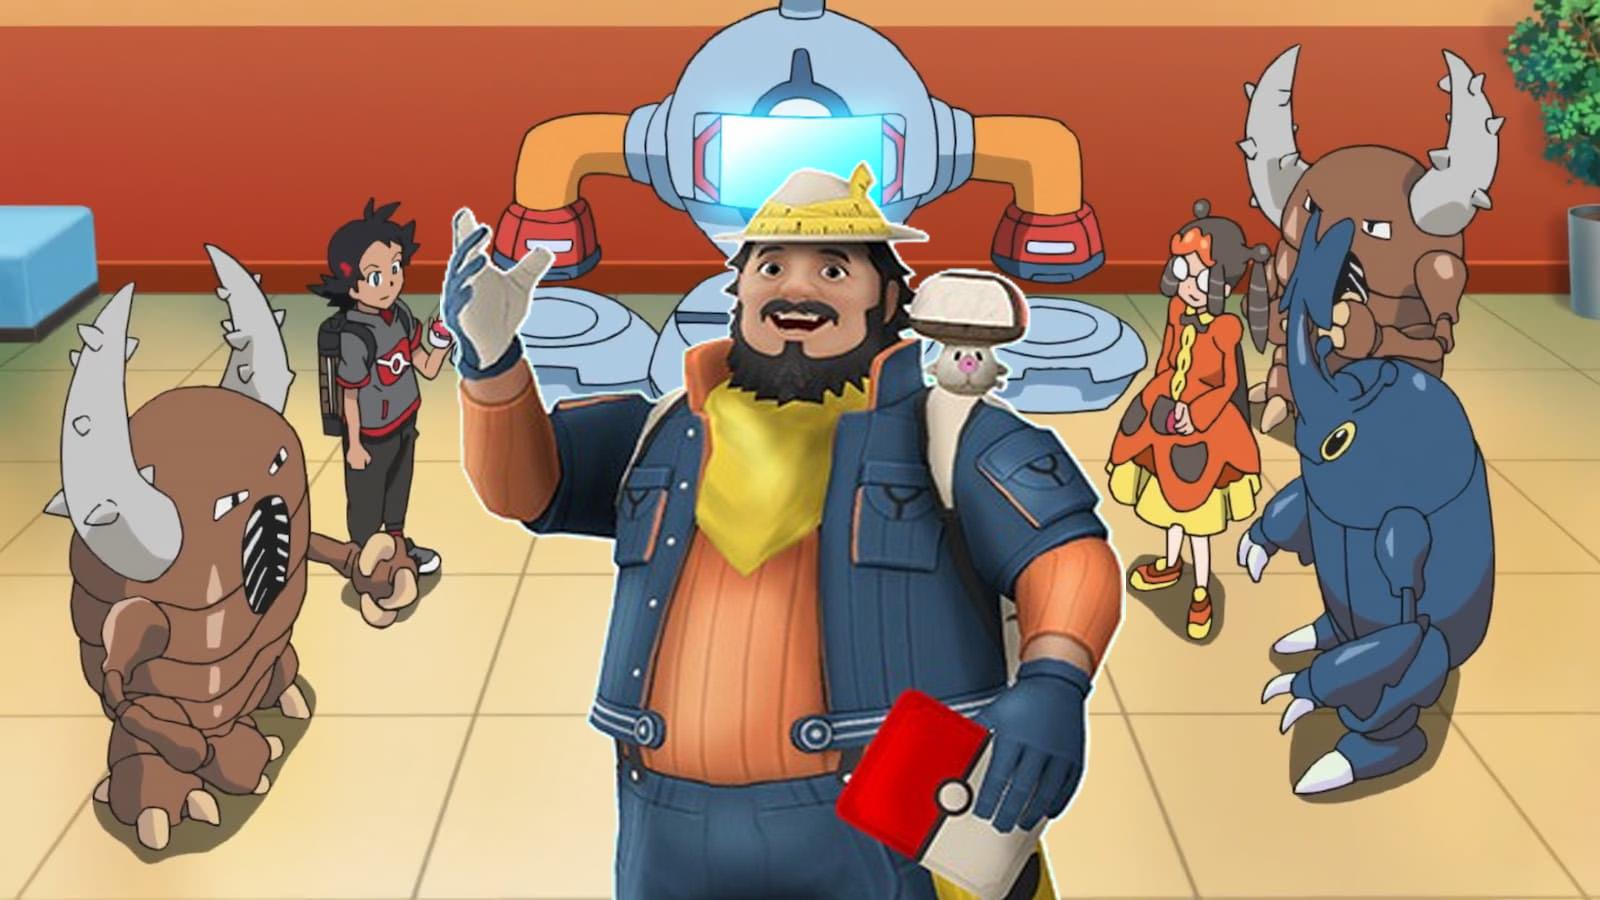 Mateo in front of Pokemon trainers trading